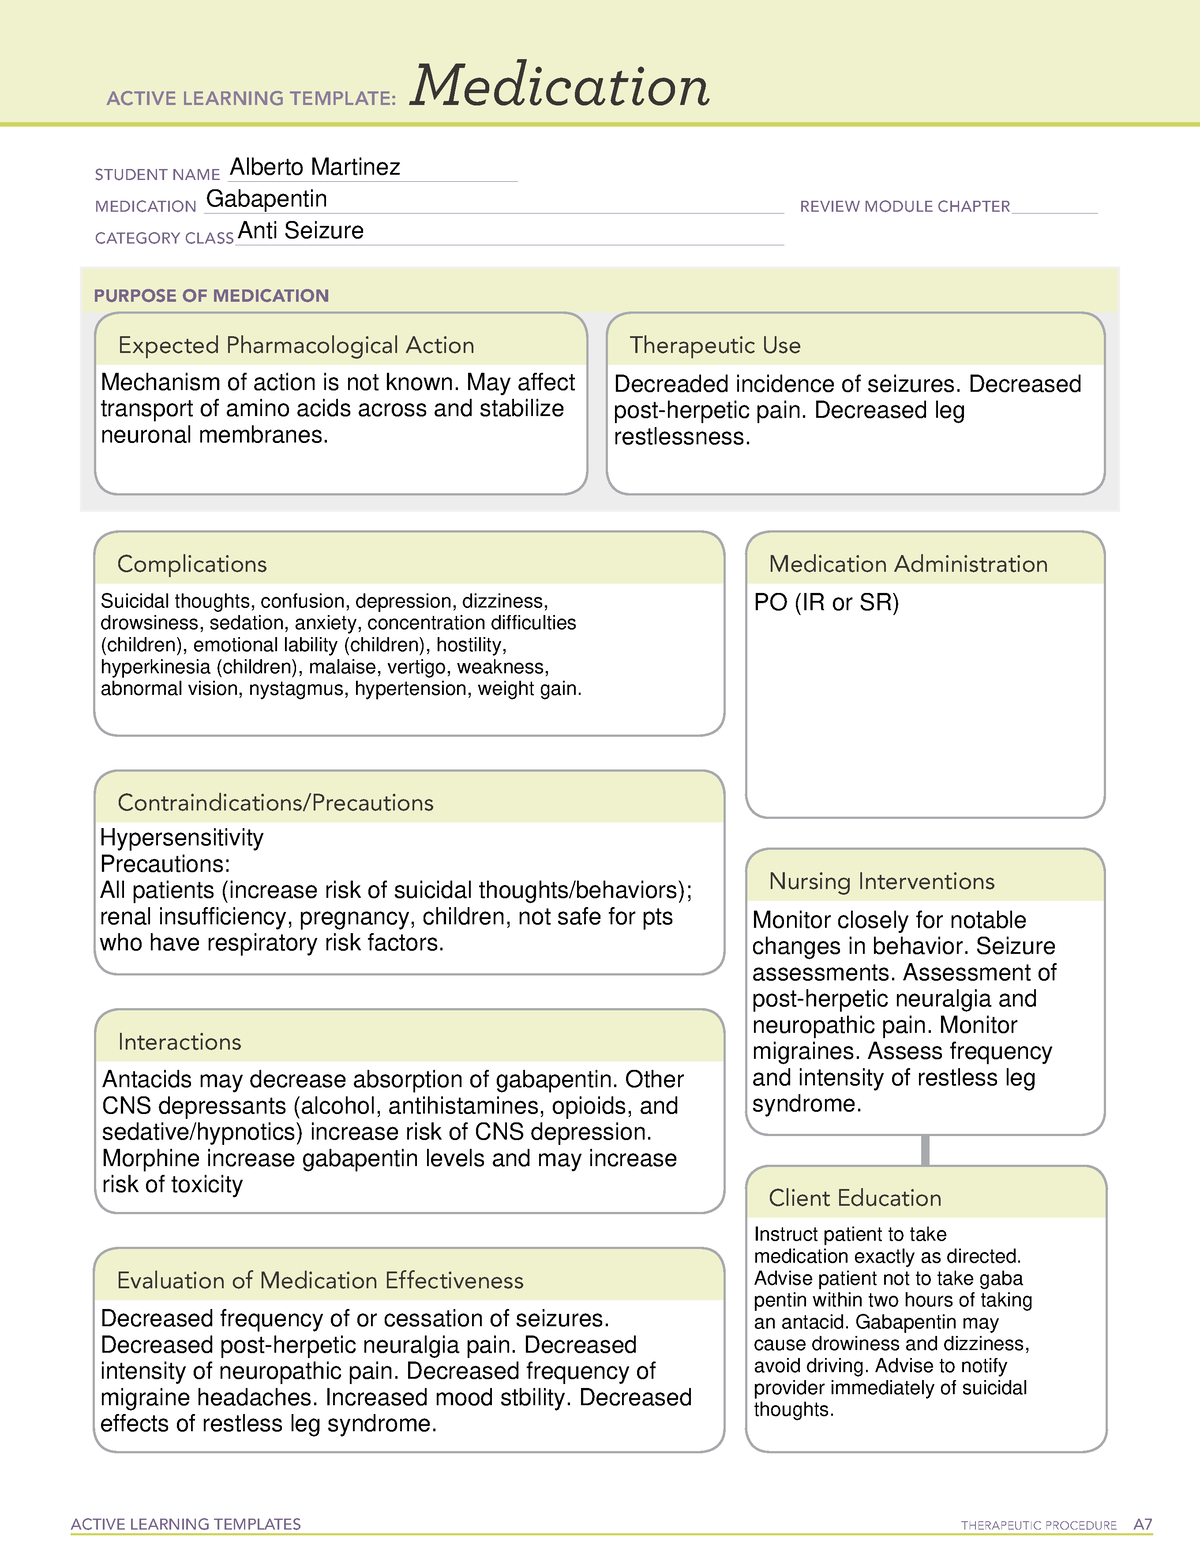 ATI Medication Active Template Gabapentine ACTIVE LEARNING TEMPLATES